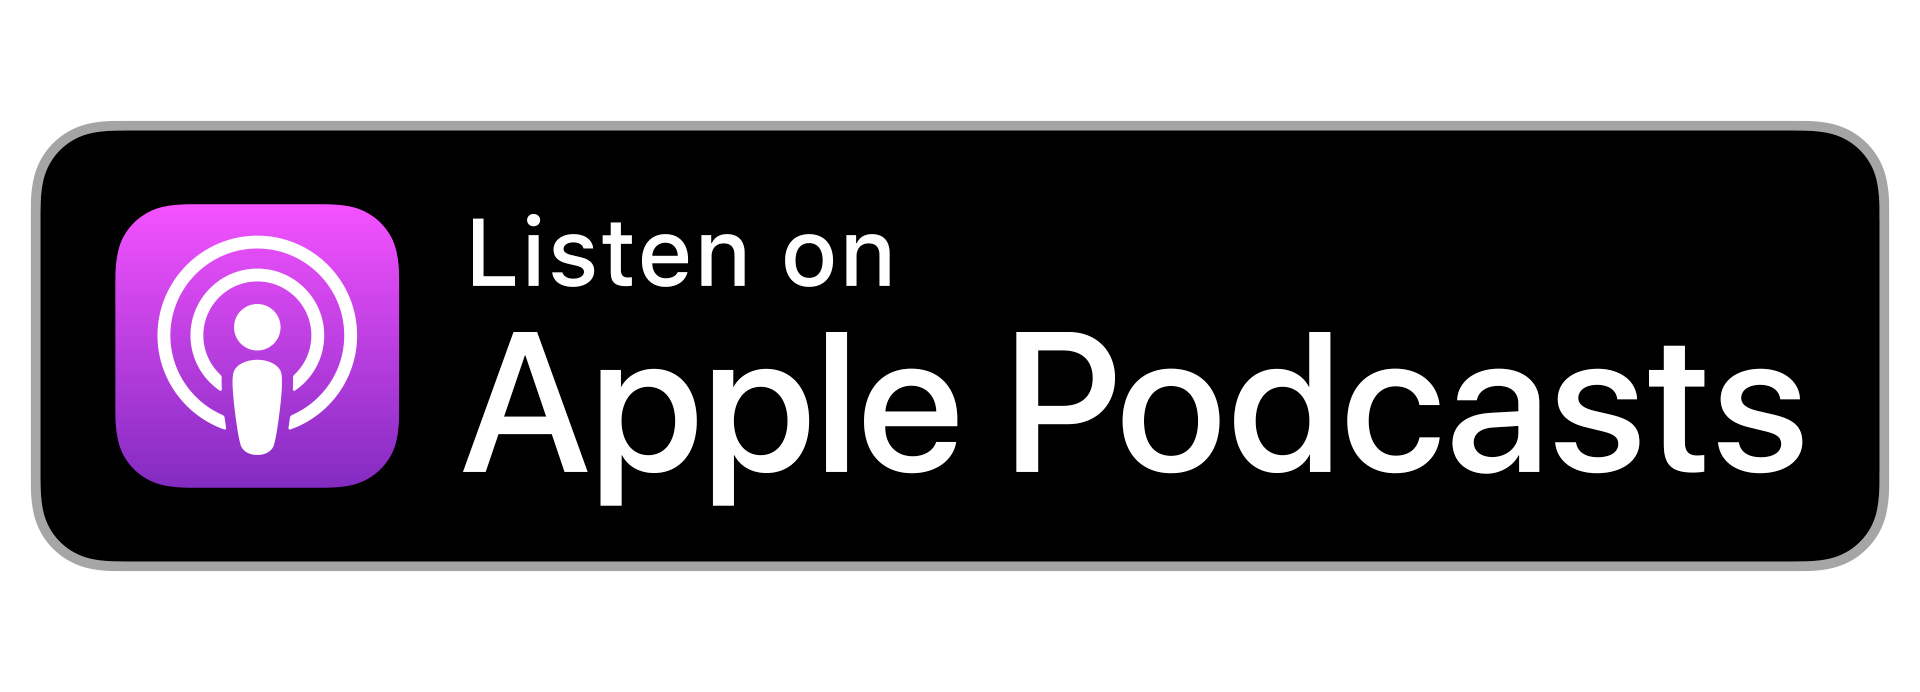 Image of Listen on Apple Podcasts button